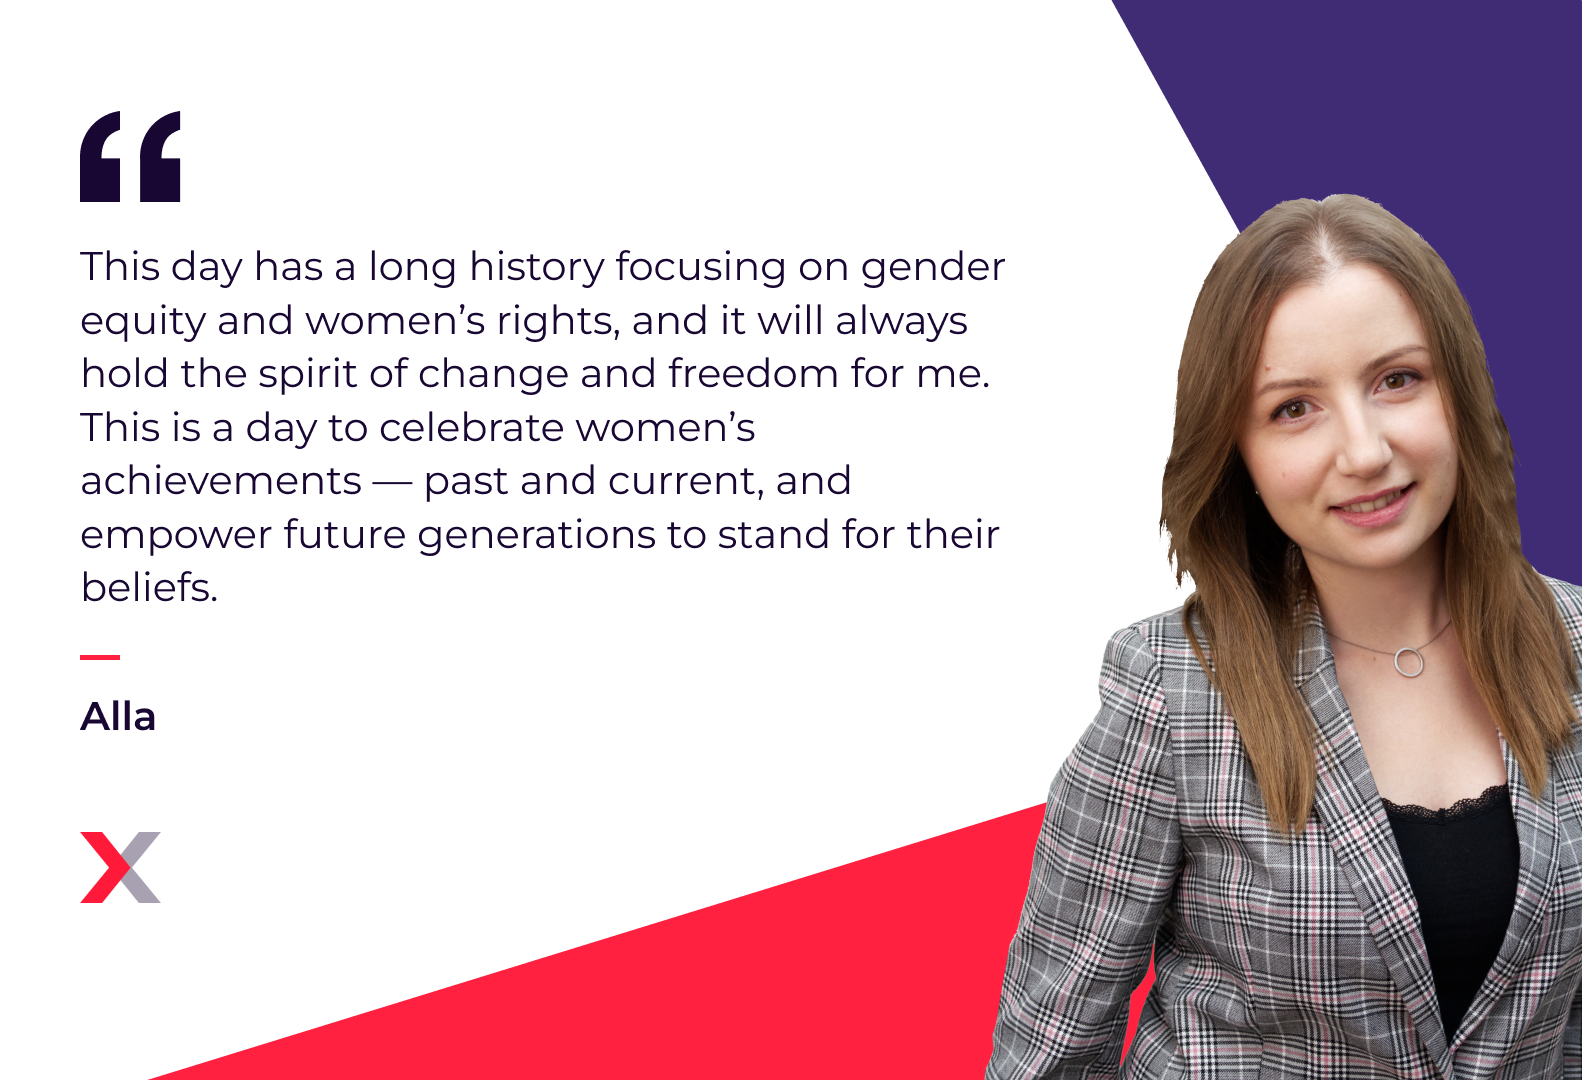 Alla: “This day has a long history focusing on gender equity and women’s rights, and it will always hold the spirit of change and freedom for me. This is a day to celebrate women’s achievements — past and current, and empower future generations to stand for their beliefs.